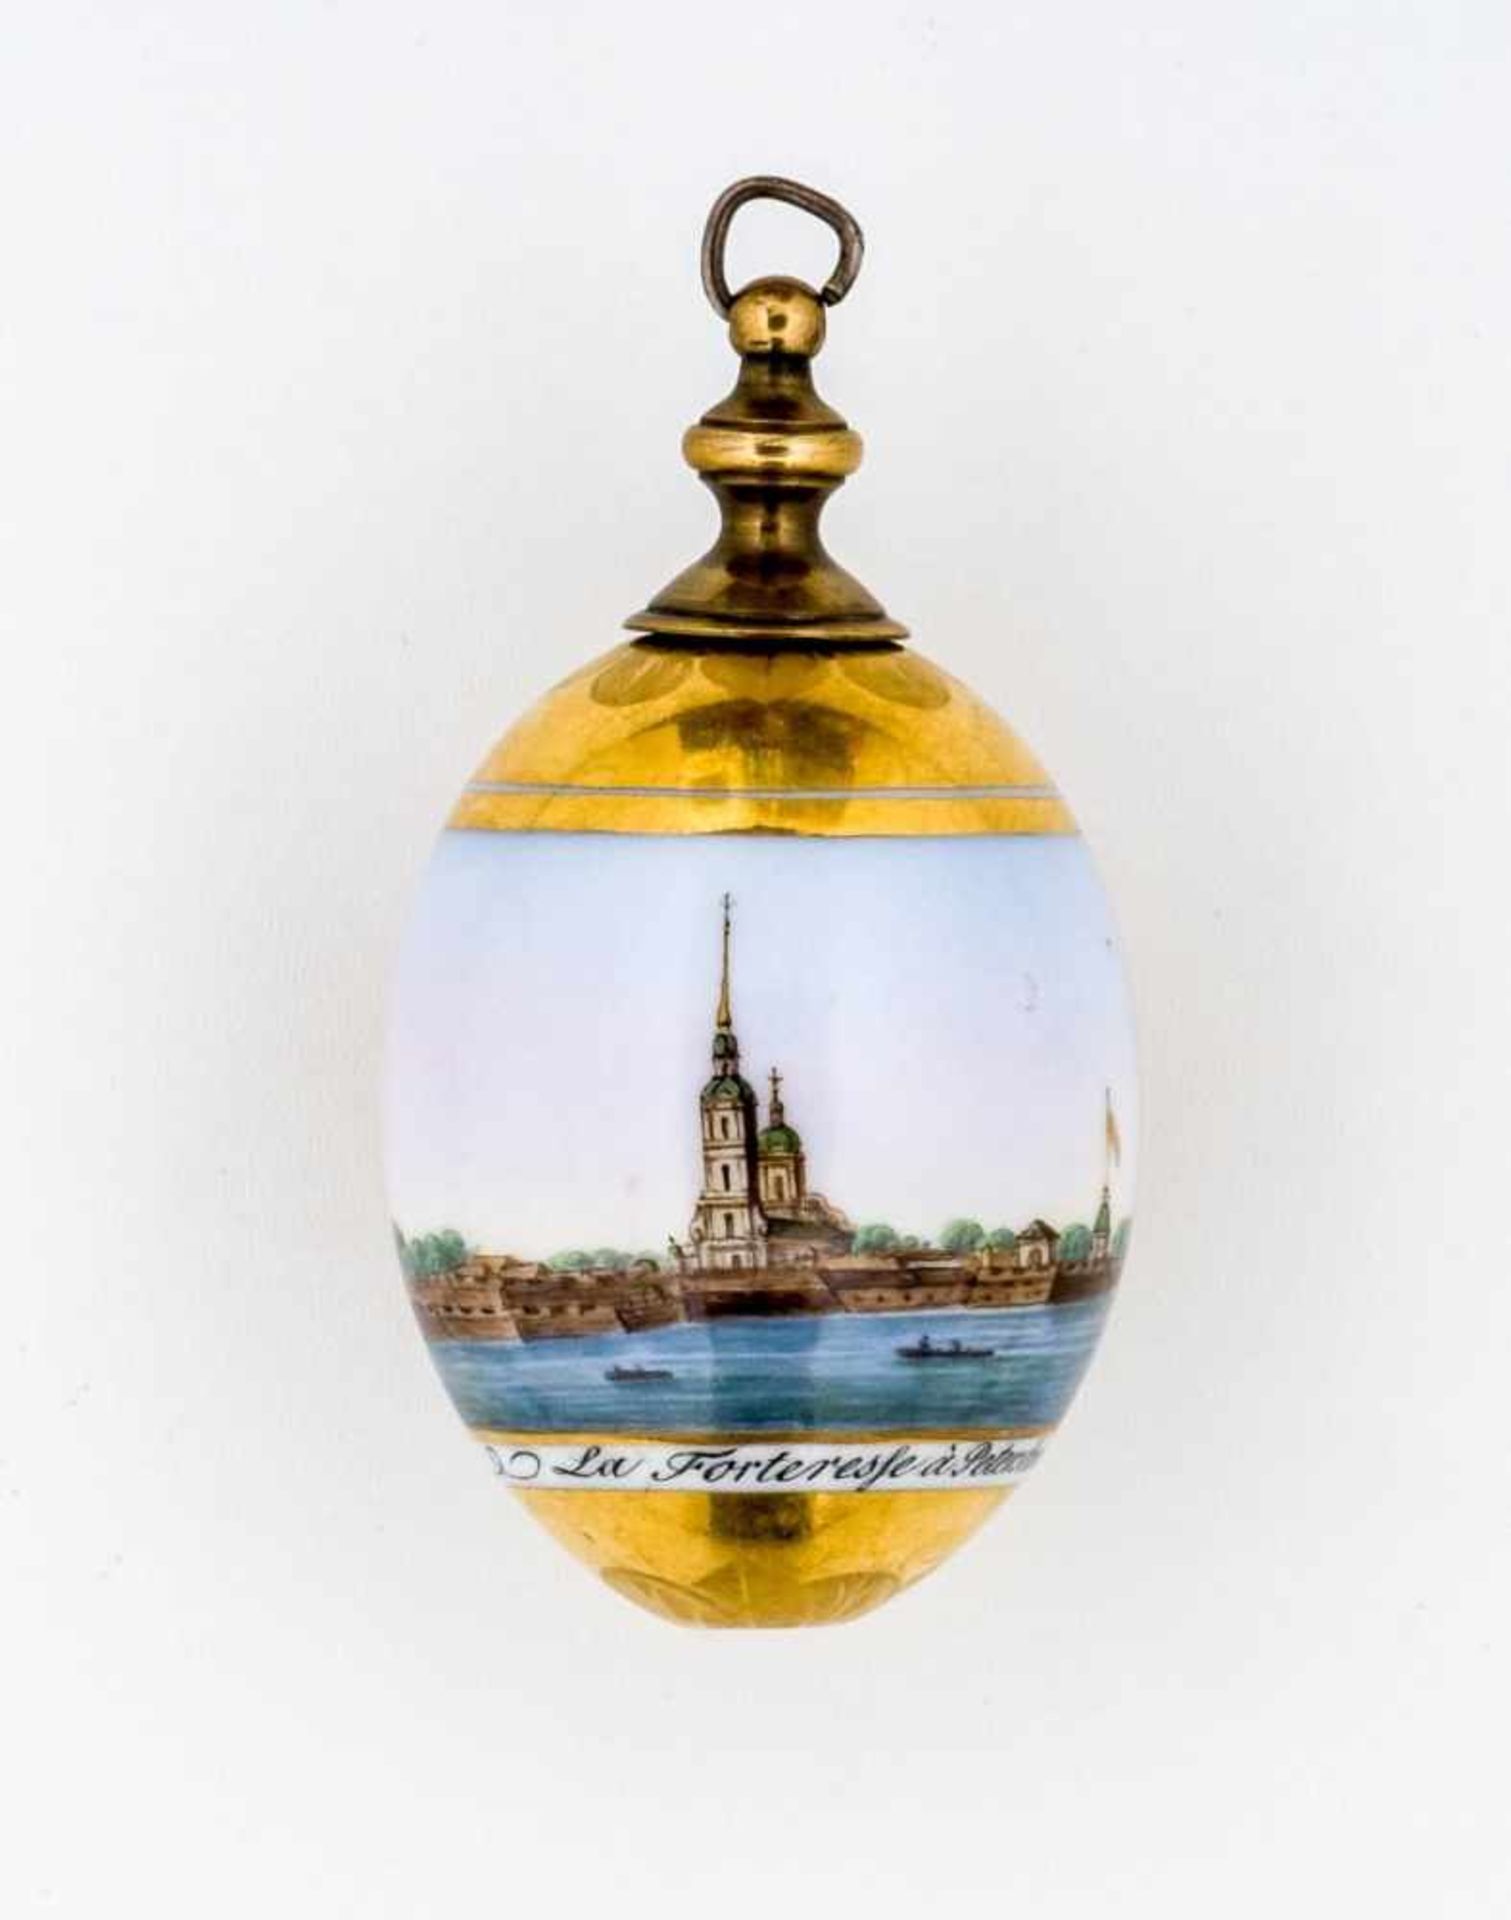 A rare porcelain Easter egg with veduta of the Peter and Paul Cathedral as well as thefortress of